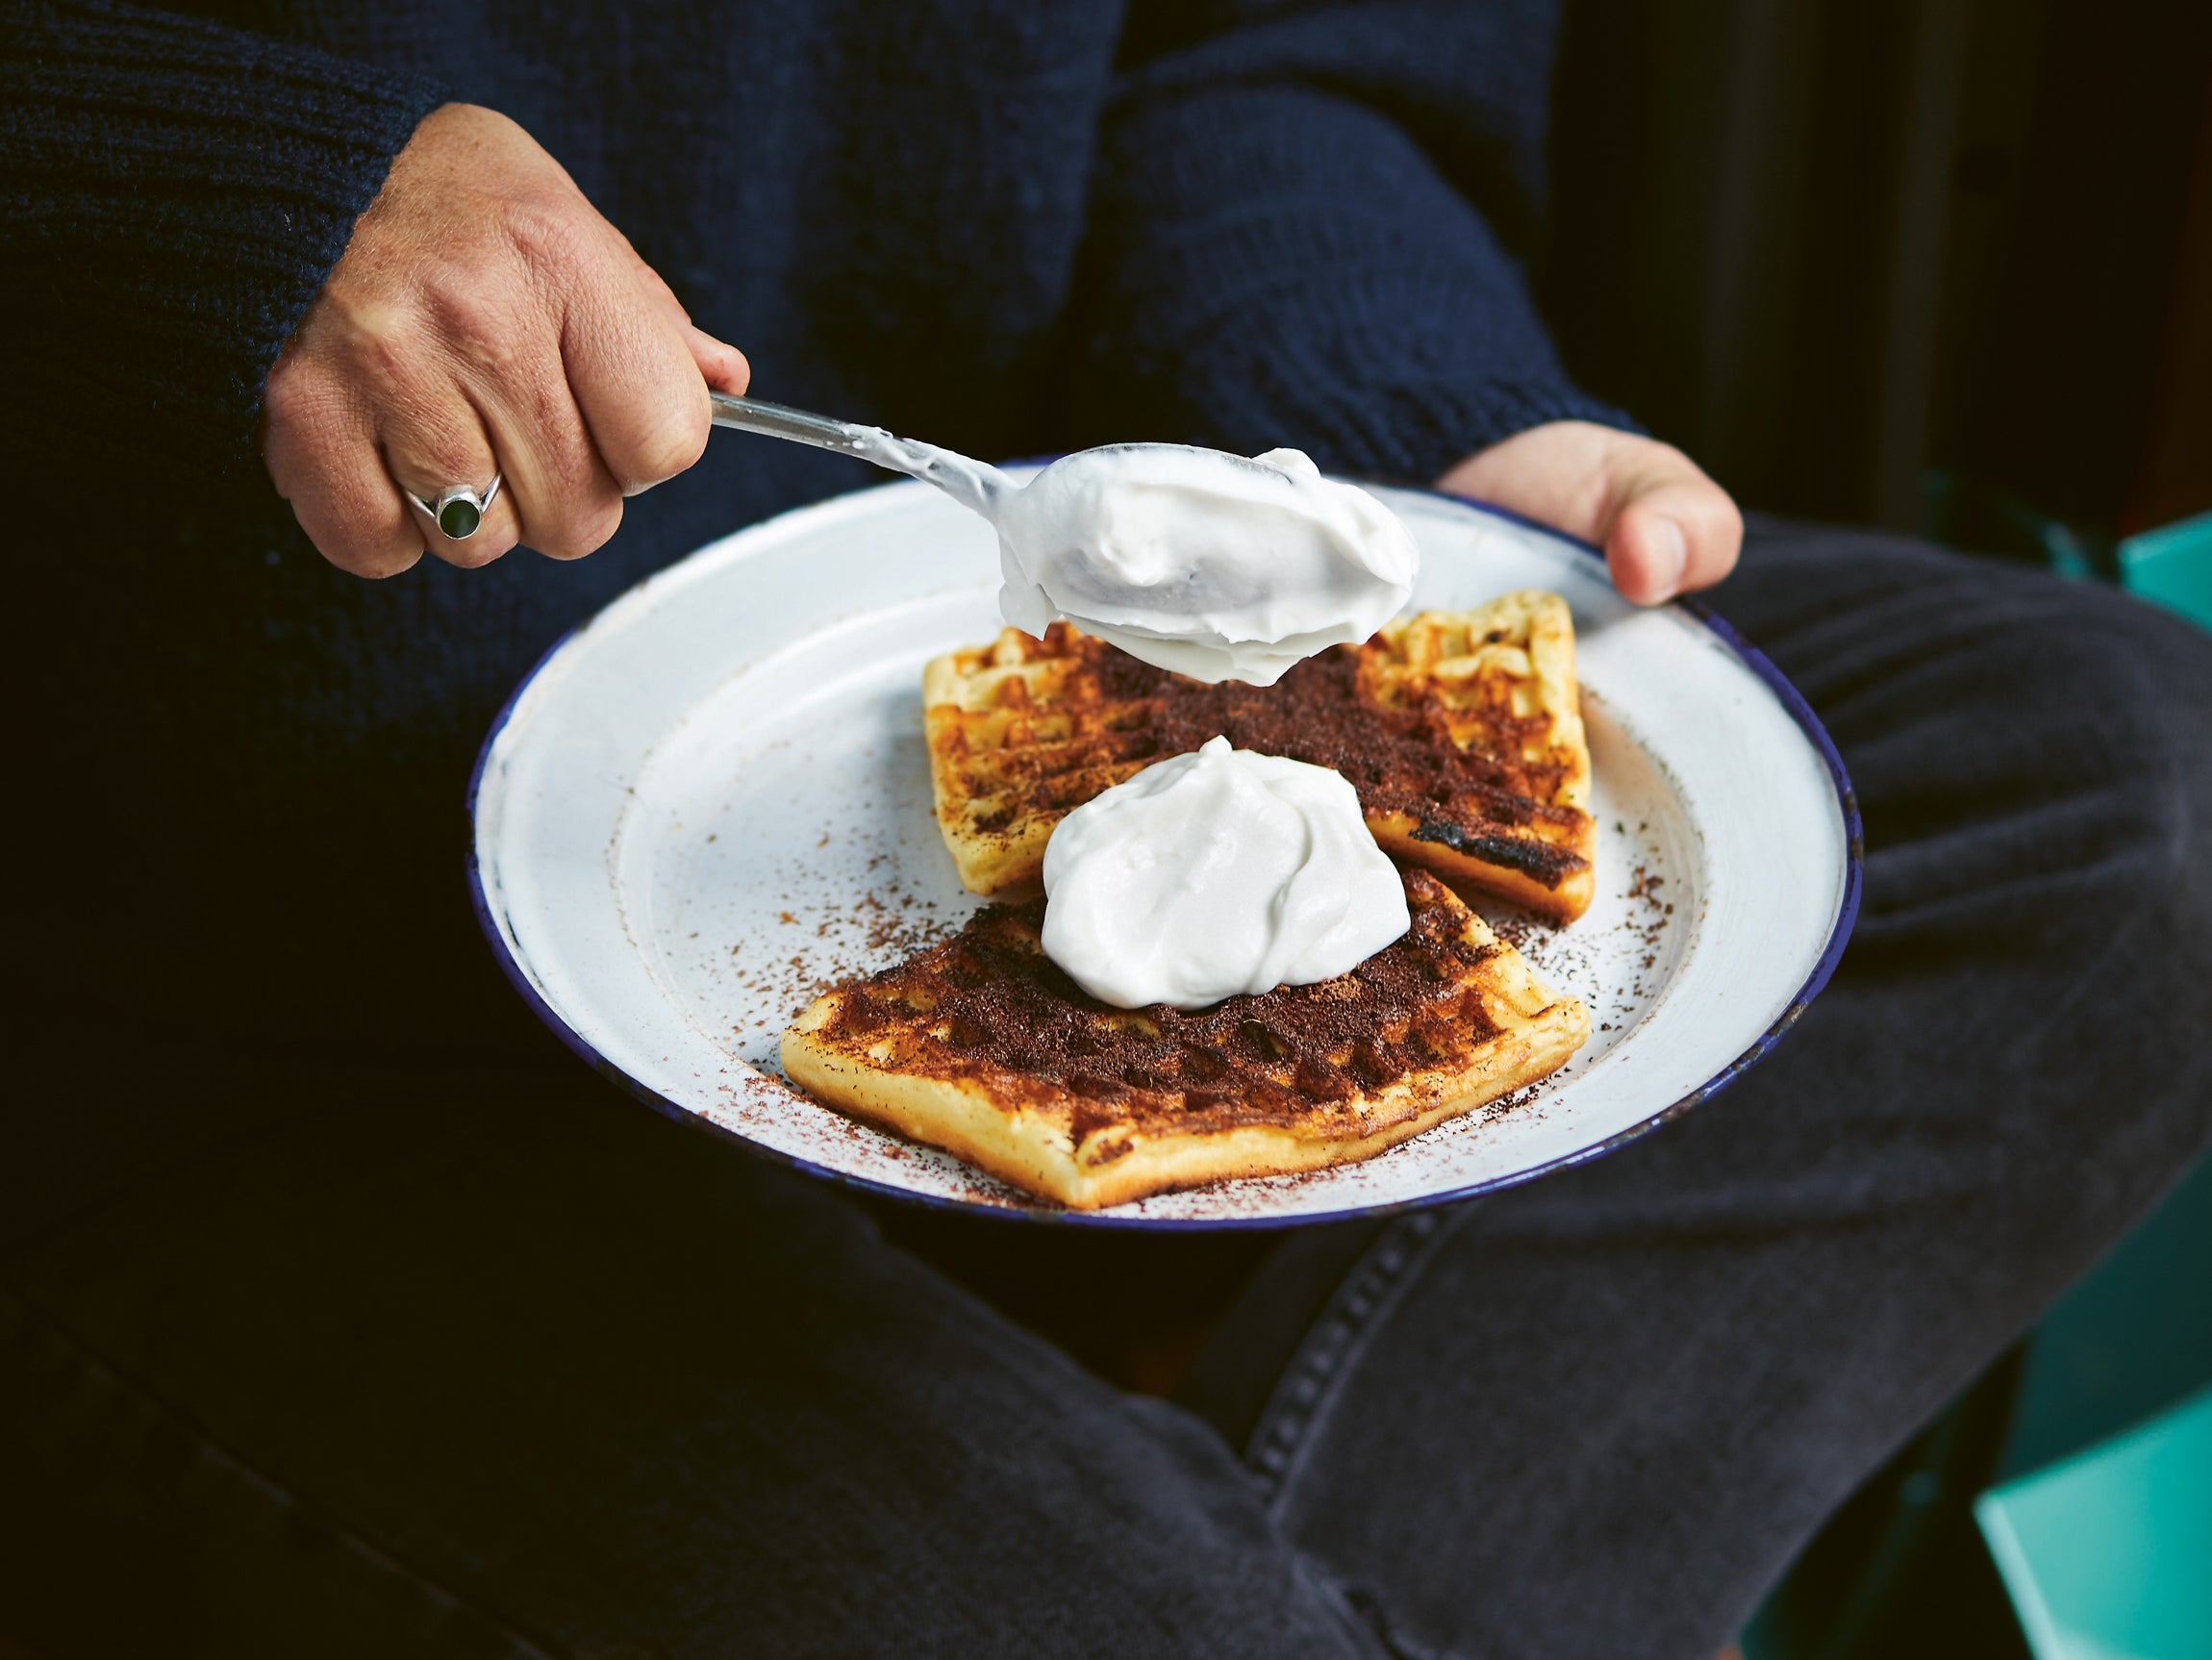 Why have just a marshmallow when you can have coconut waffles?